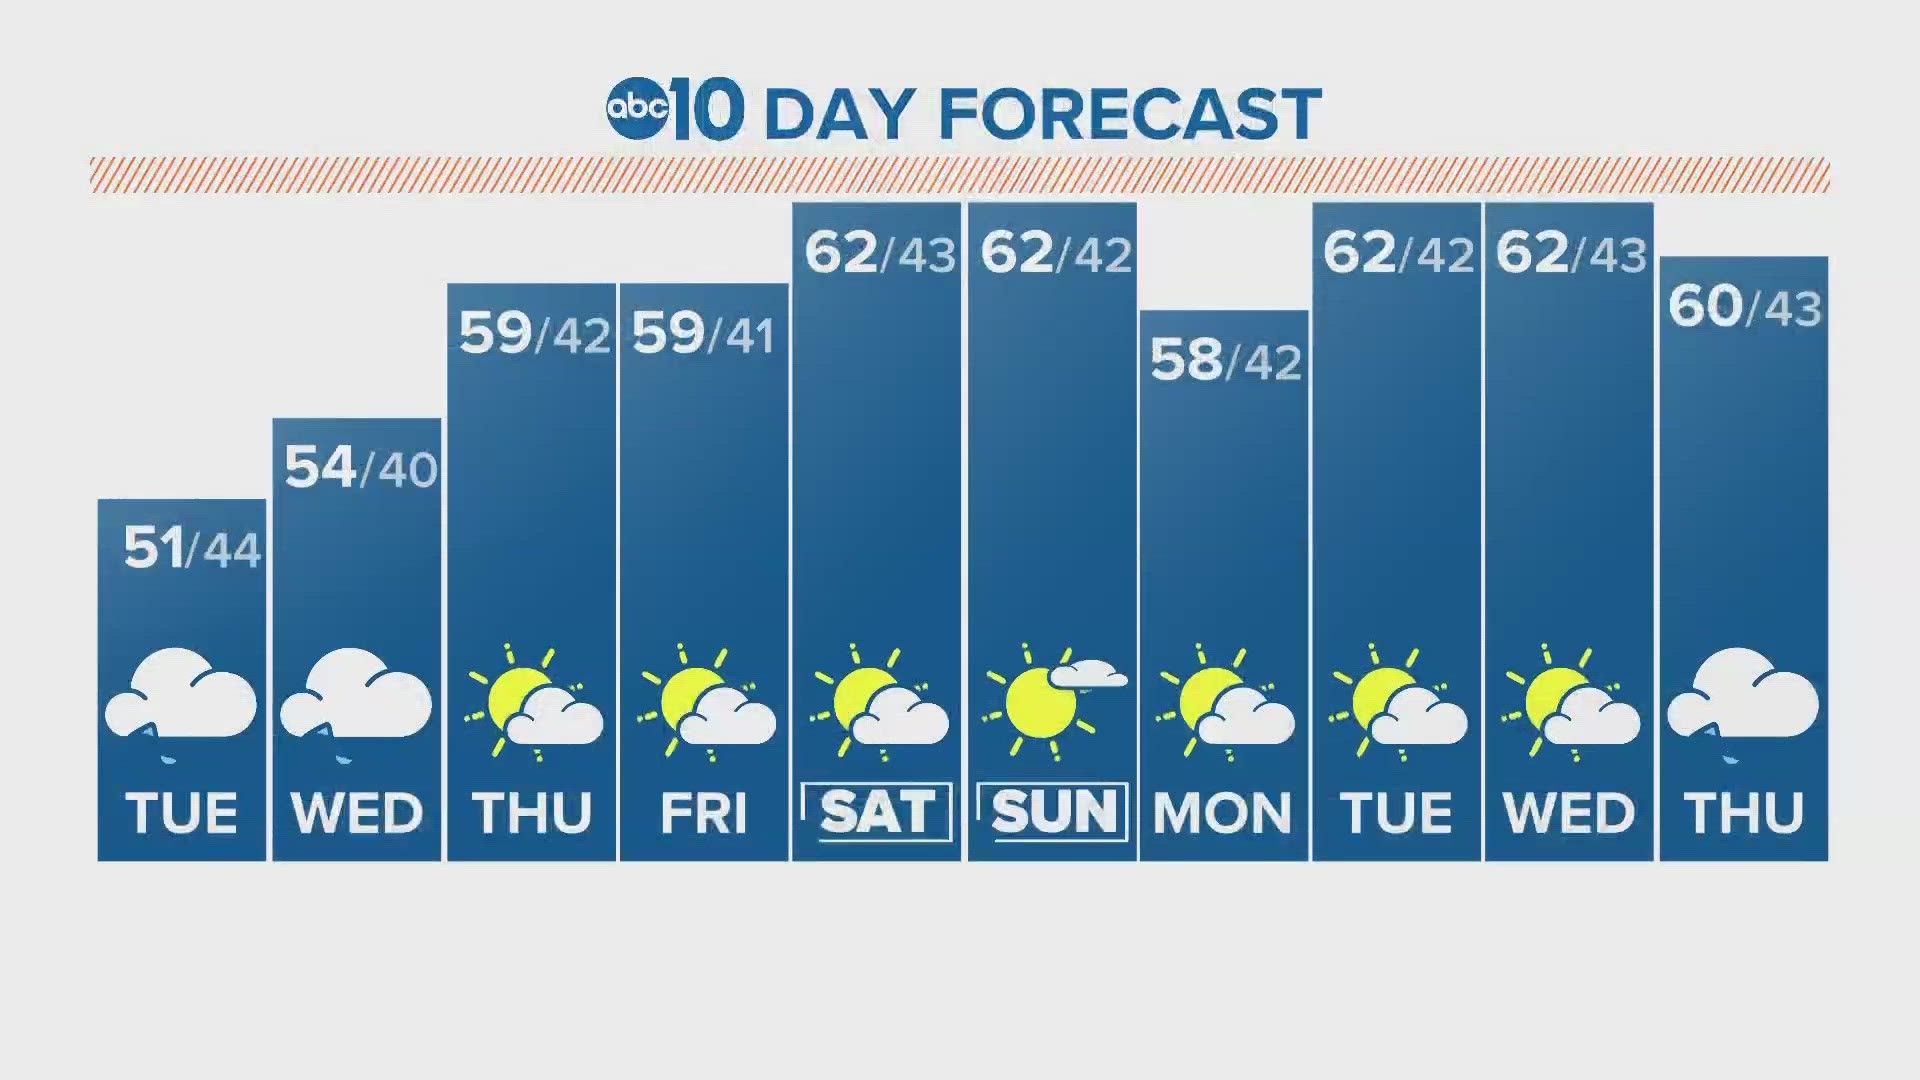 ABC10 Meteorologist Rob Carlmark tells us what to expect for the next 10 days of weather.